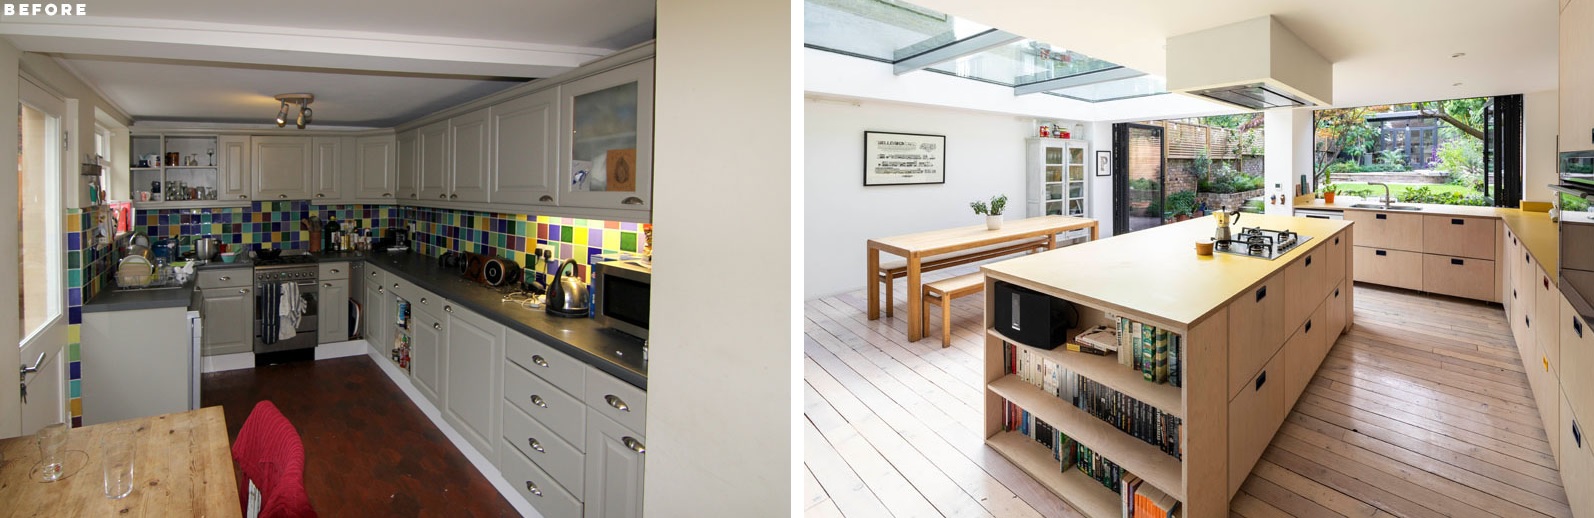 This is a comparison of the before and after kitchen designs, with an emphasis on spaciousness